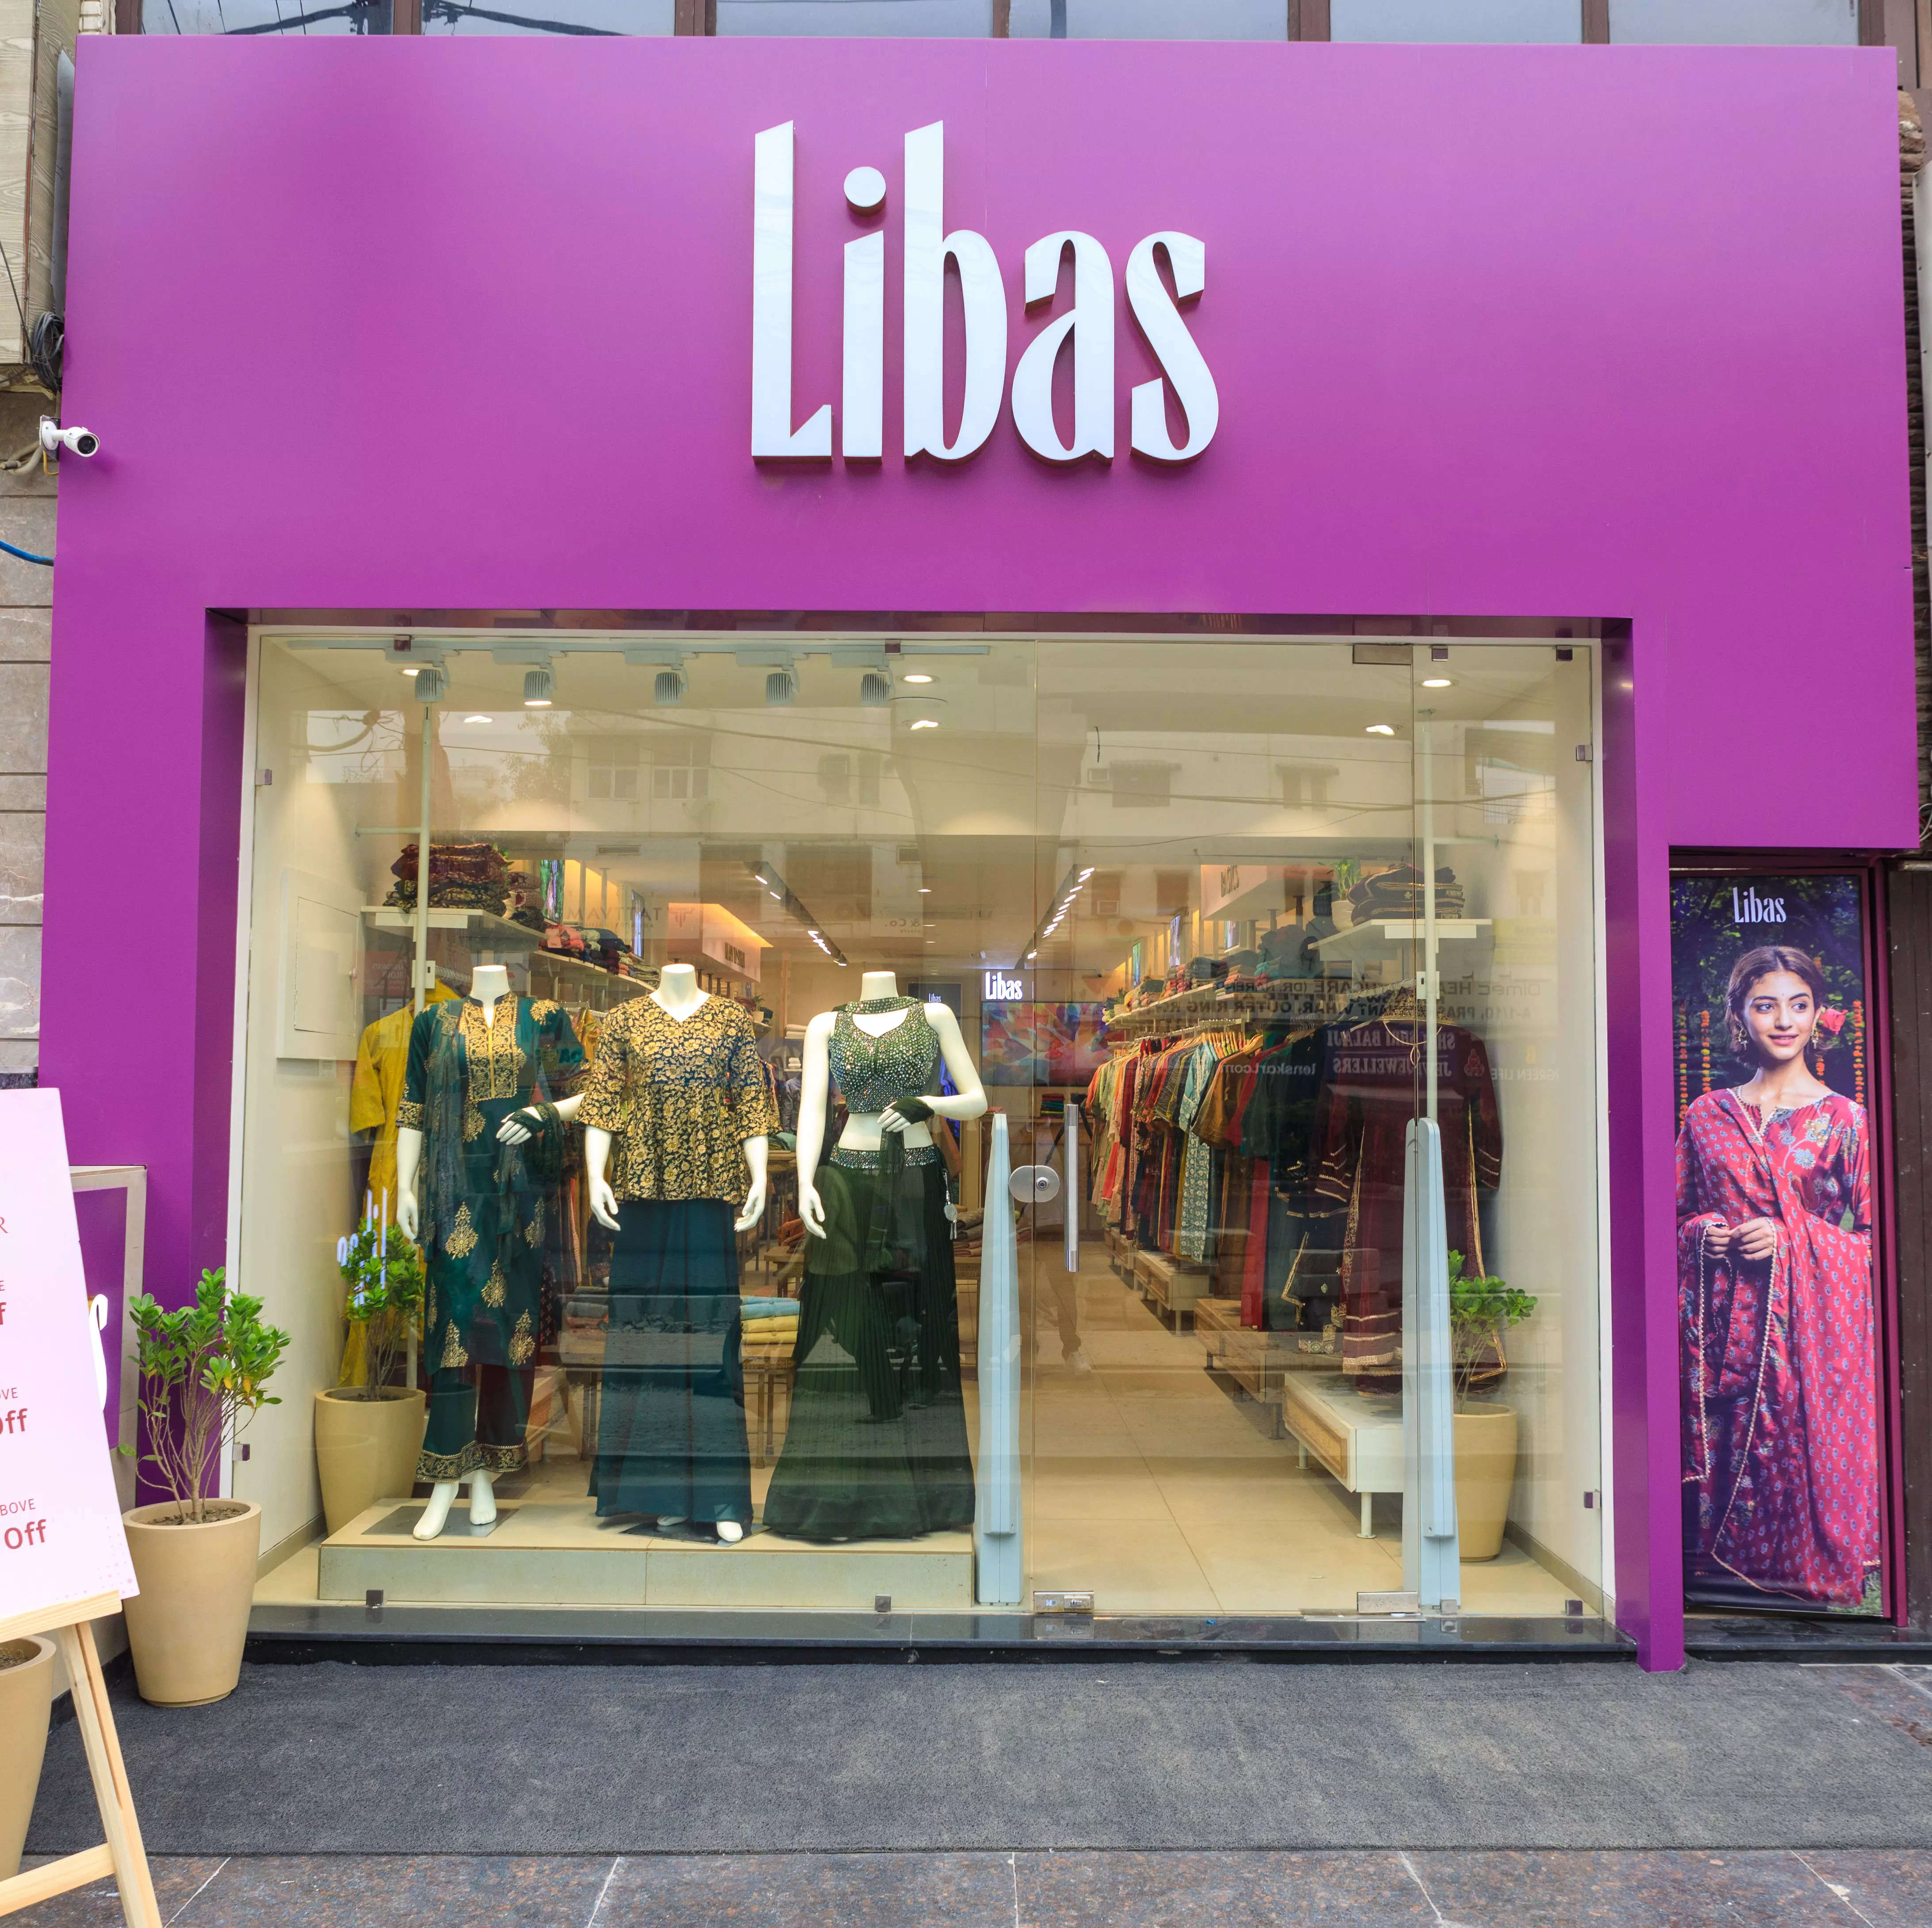 Ethnic wear brand Libas records Rs 600 cr GMV revenue in FY 22, plans to open 50 retail stores by the end of this year